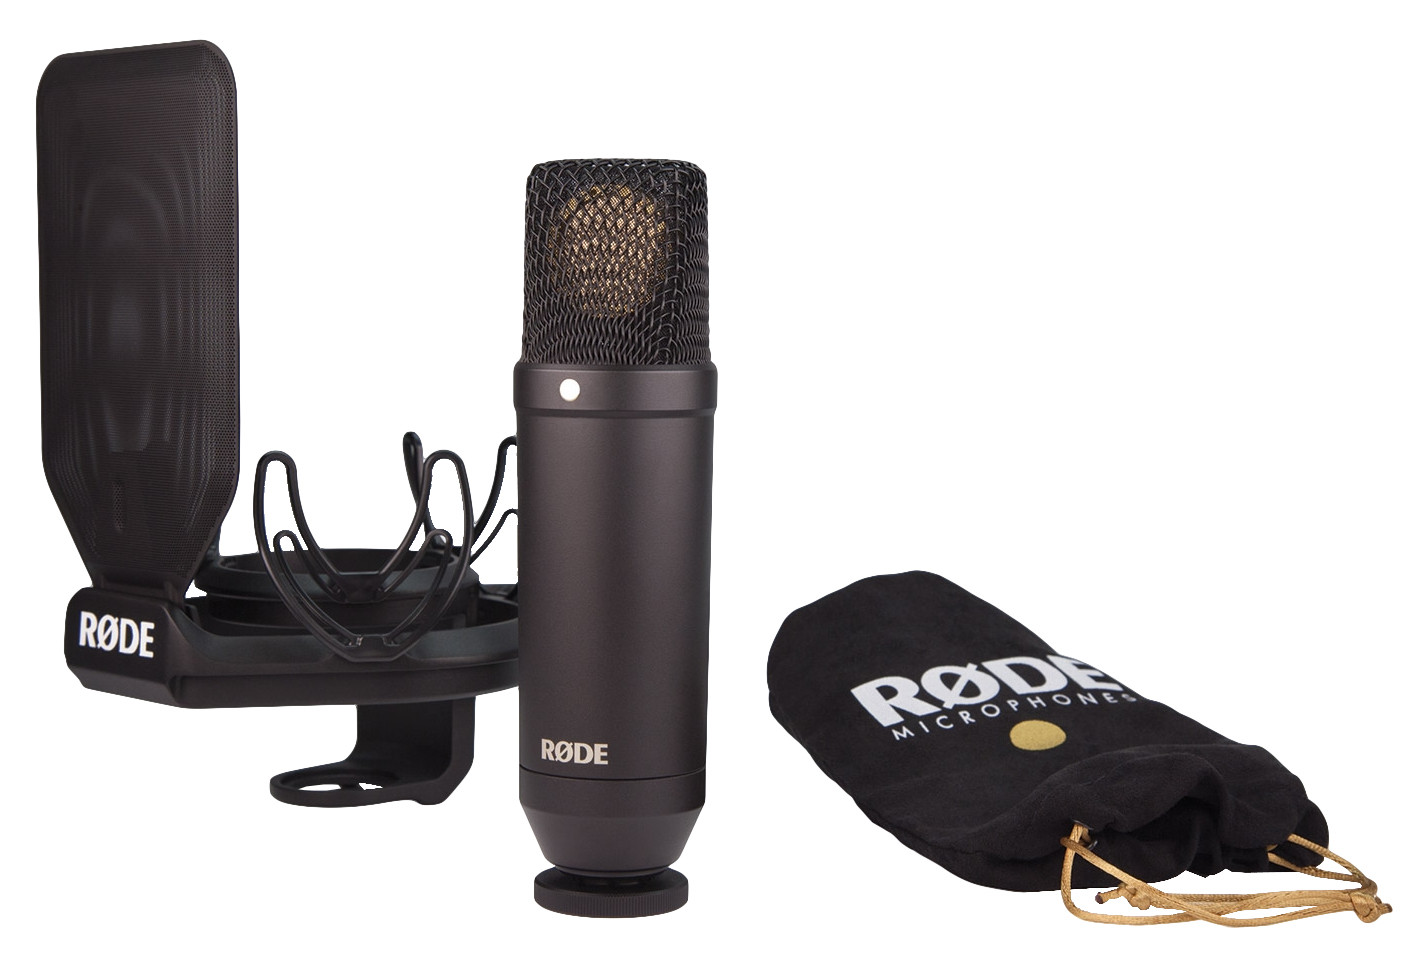 Rode NT1 Kit Complete recording solution